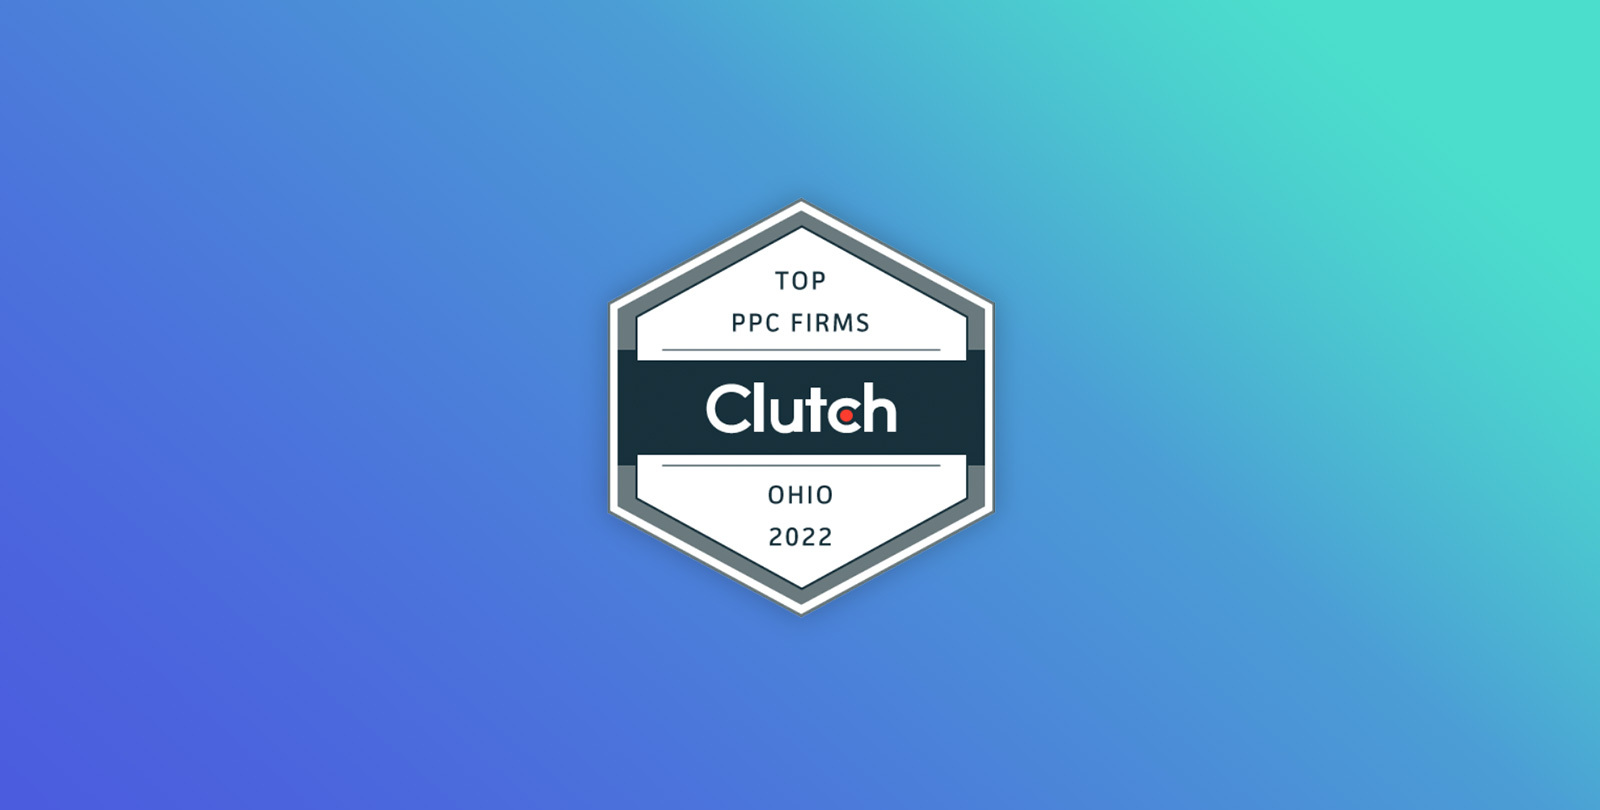 Clutch Names OppGen Marketing a Top PPC Firm in Ohio for 2022